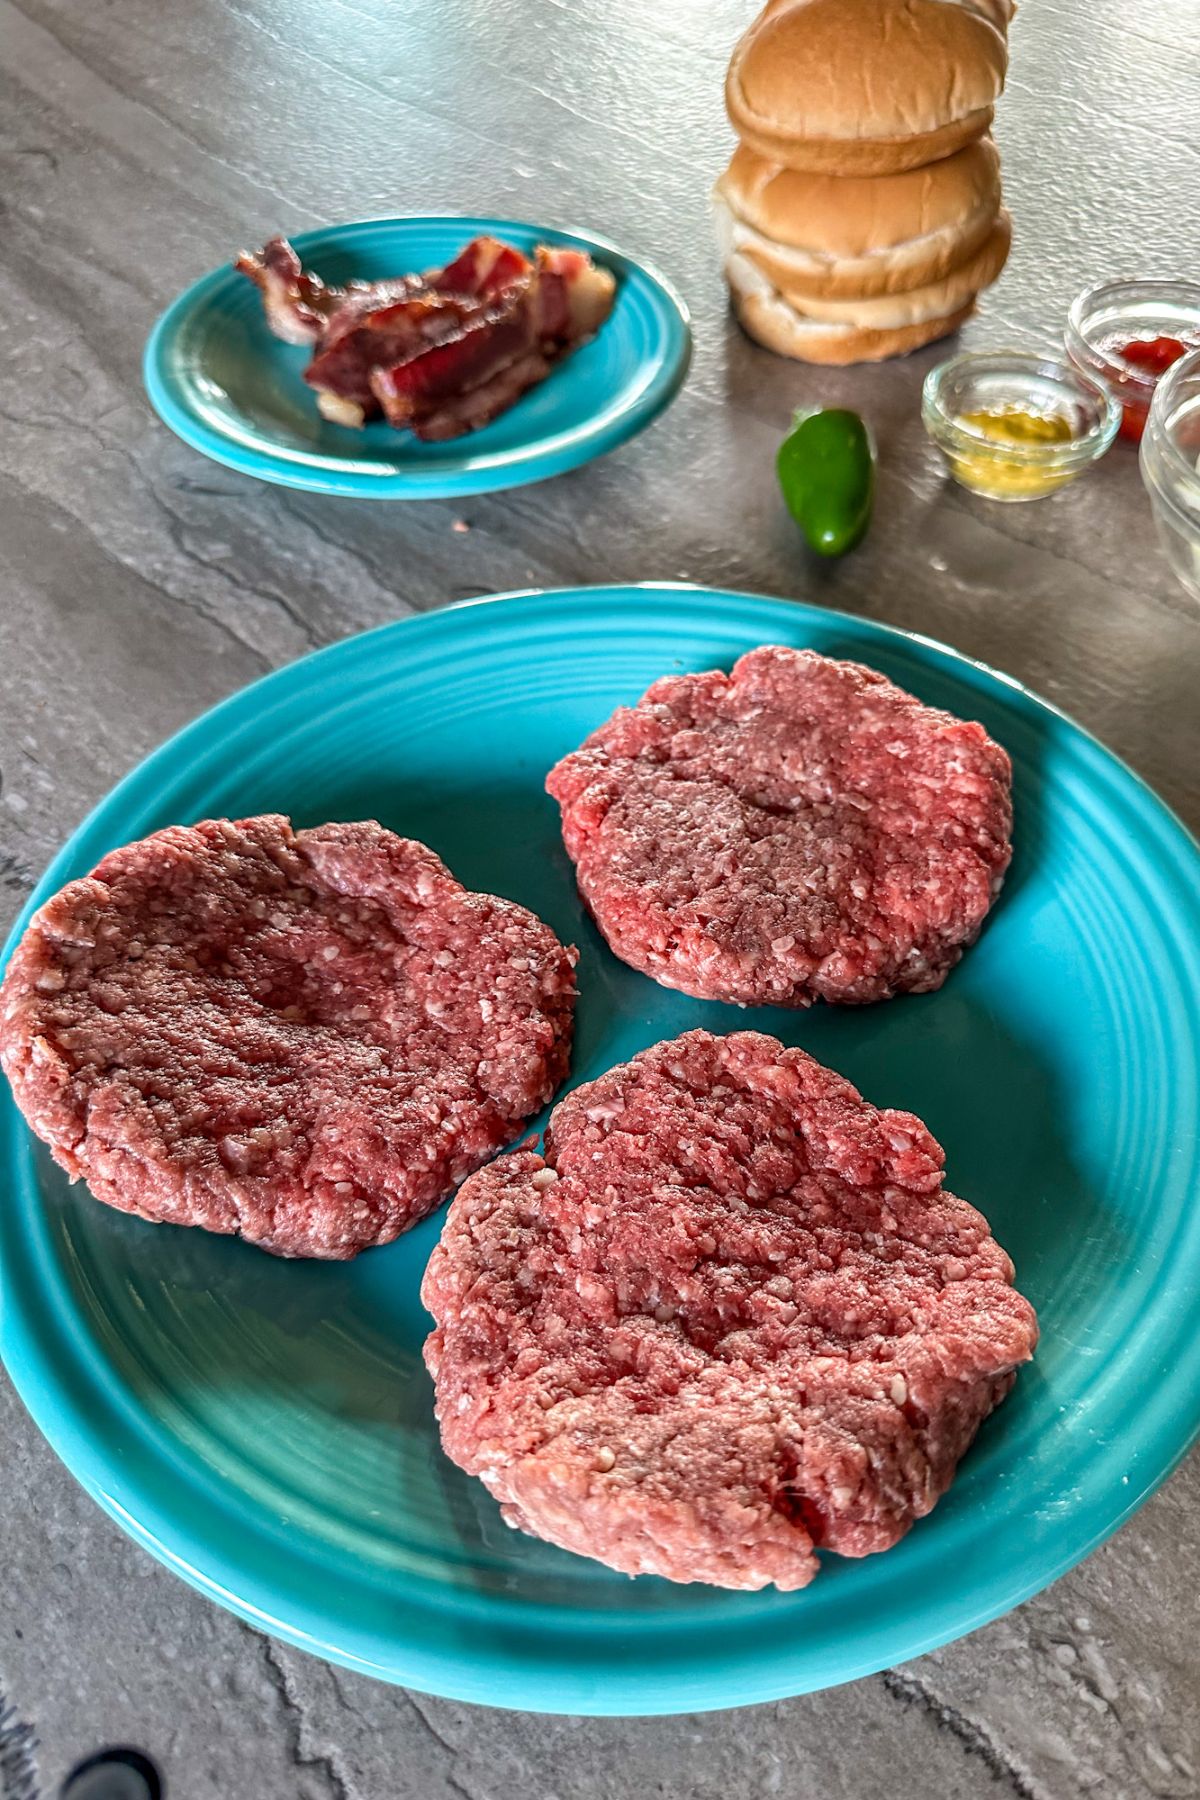 Raw ground beef patties on a plate.